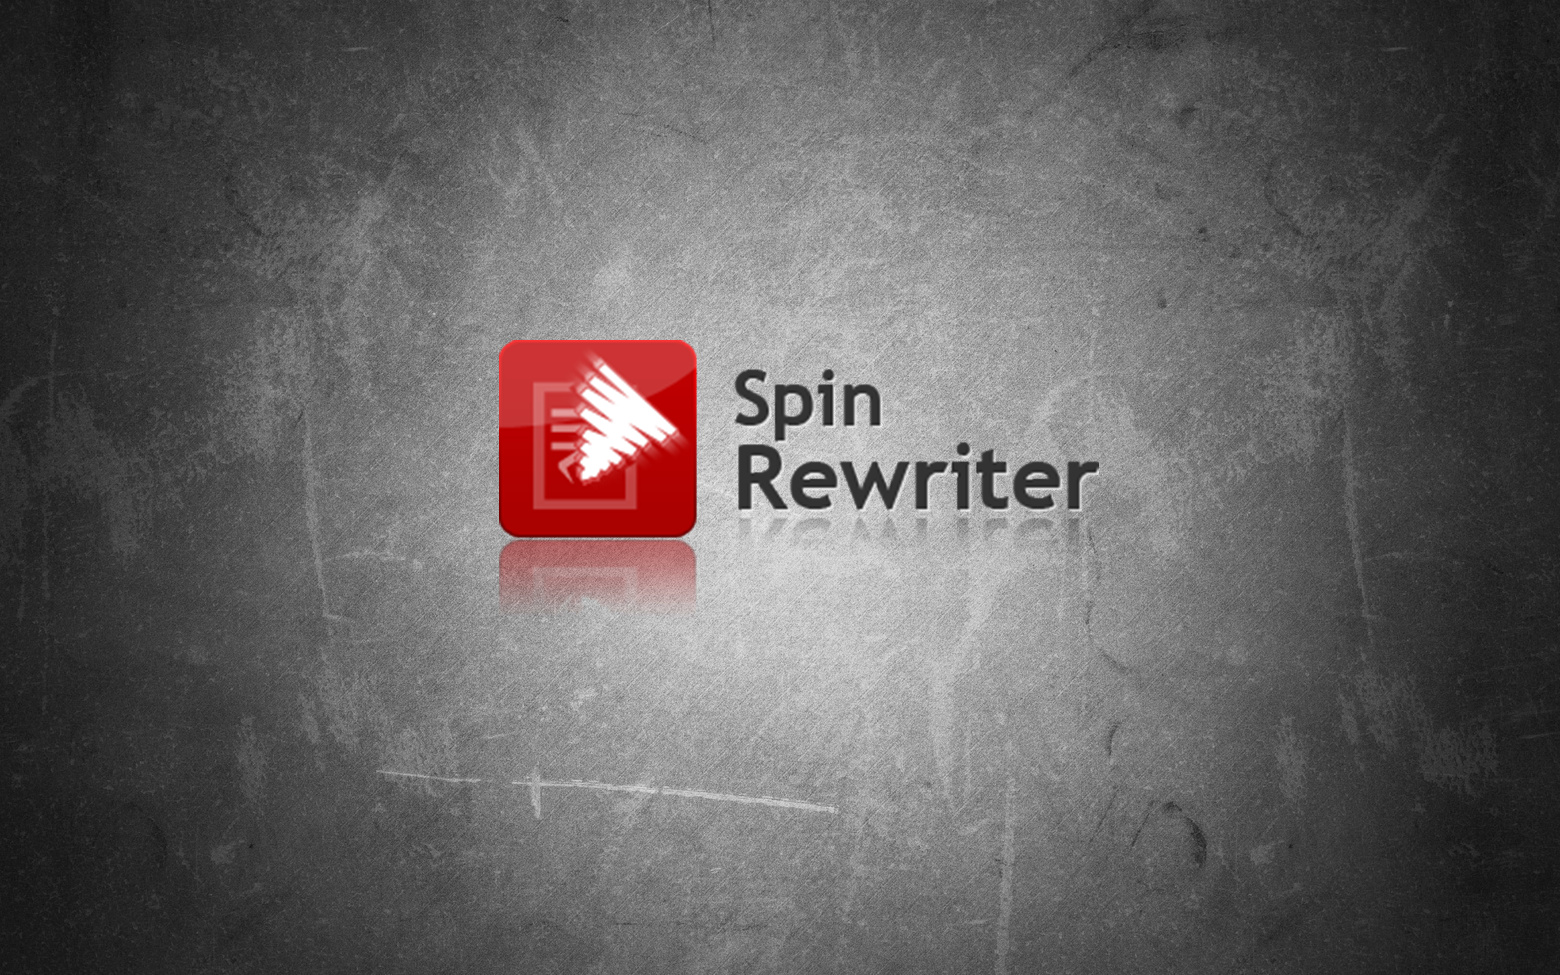 Spin Rewriter Honest Review & In-Depth Tutorial - The Most Cost ...